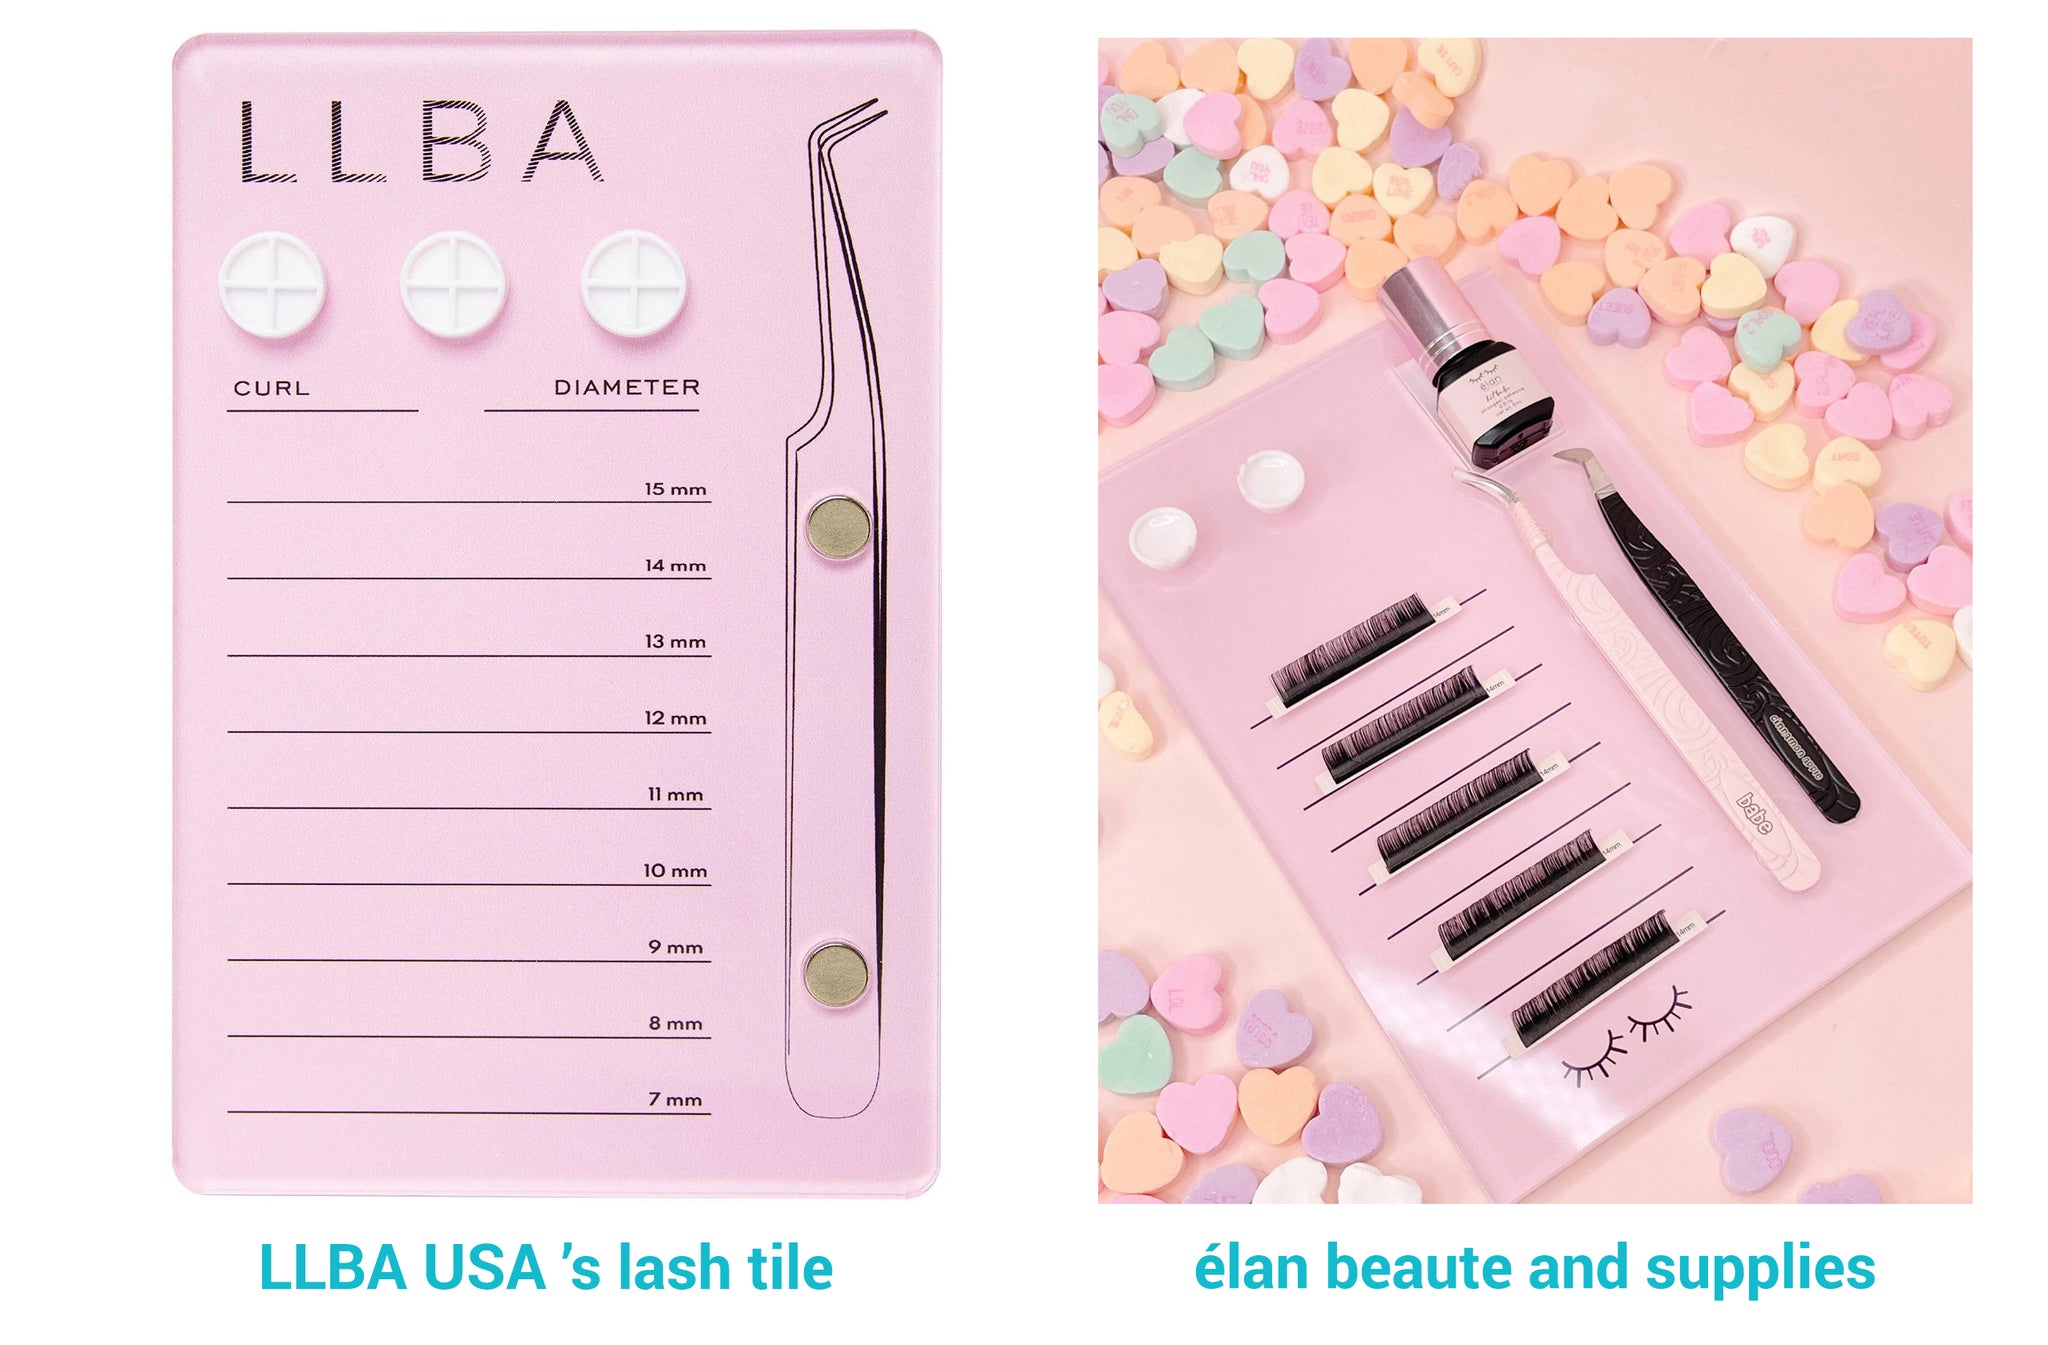 A fuller lash tile showcasing additional features such as built-in glue and tweezer holders, along with a designated space for holding glue bottles. This versatile tile offers multifunctional support for lash artists, ensuring convenient organization and easy access to essential tools during lash extension procedures